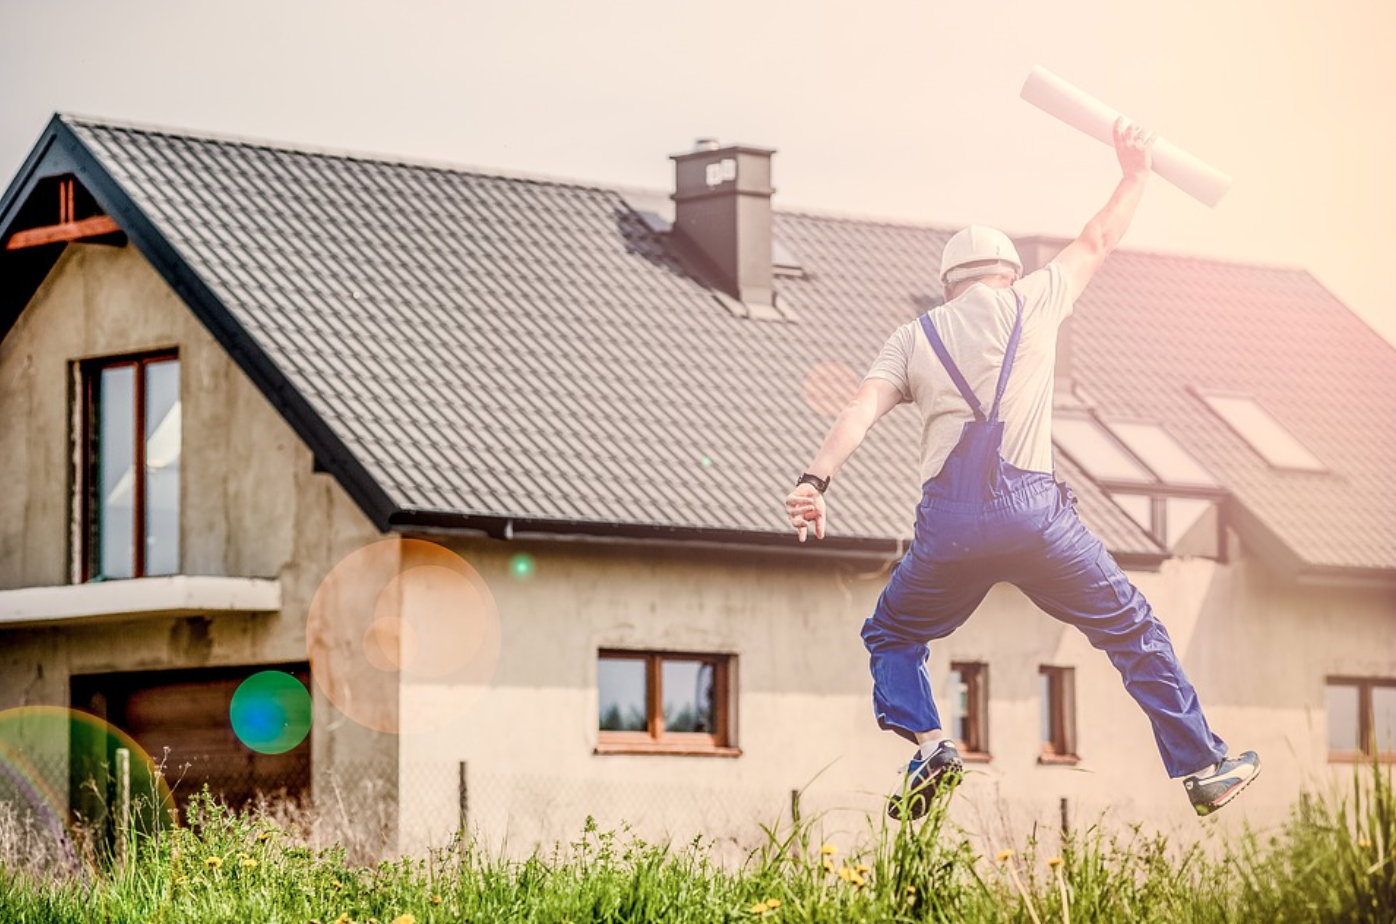 Man in overalls holding blueprint and jumping near house; image by Jarmoluk, via Pixabay.com.